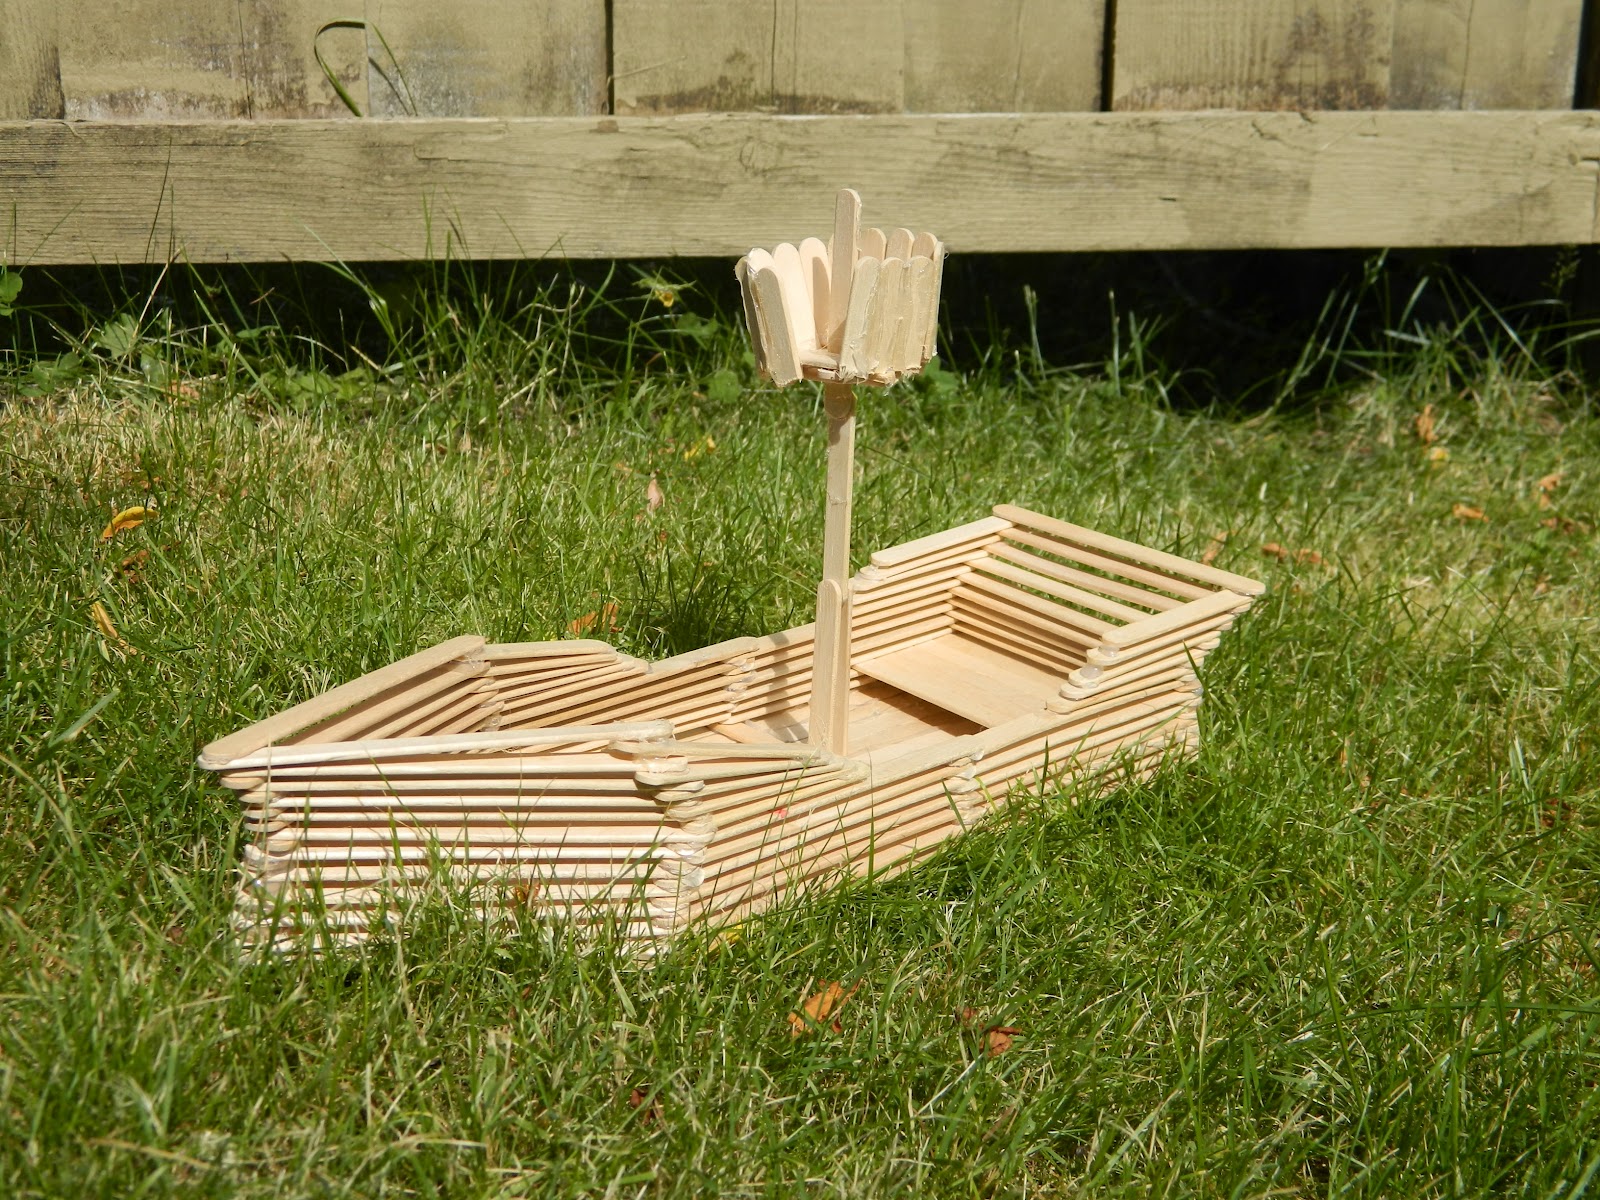 How To Make A Boat Out Of Popsicle Sticks | The Best Boat Plans